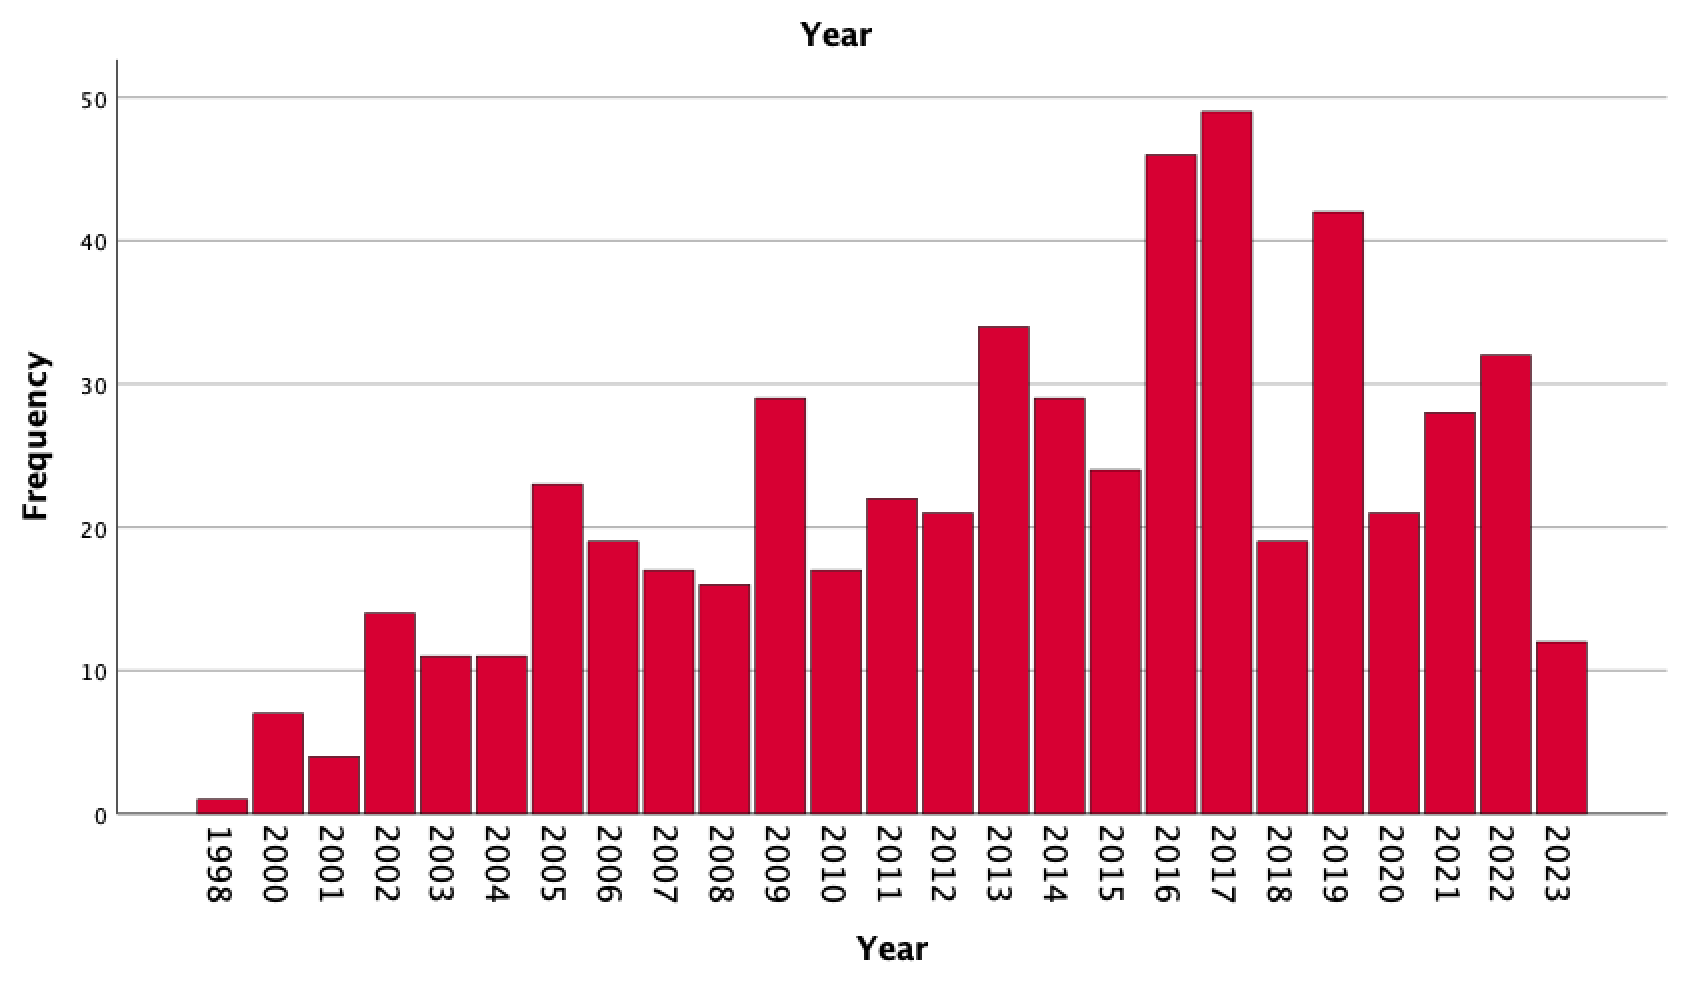 The graph shows the number of disinvitation attempts per year.